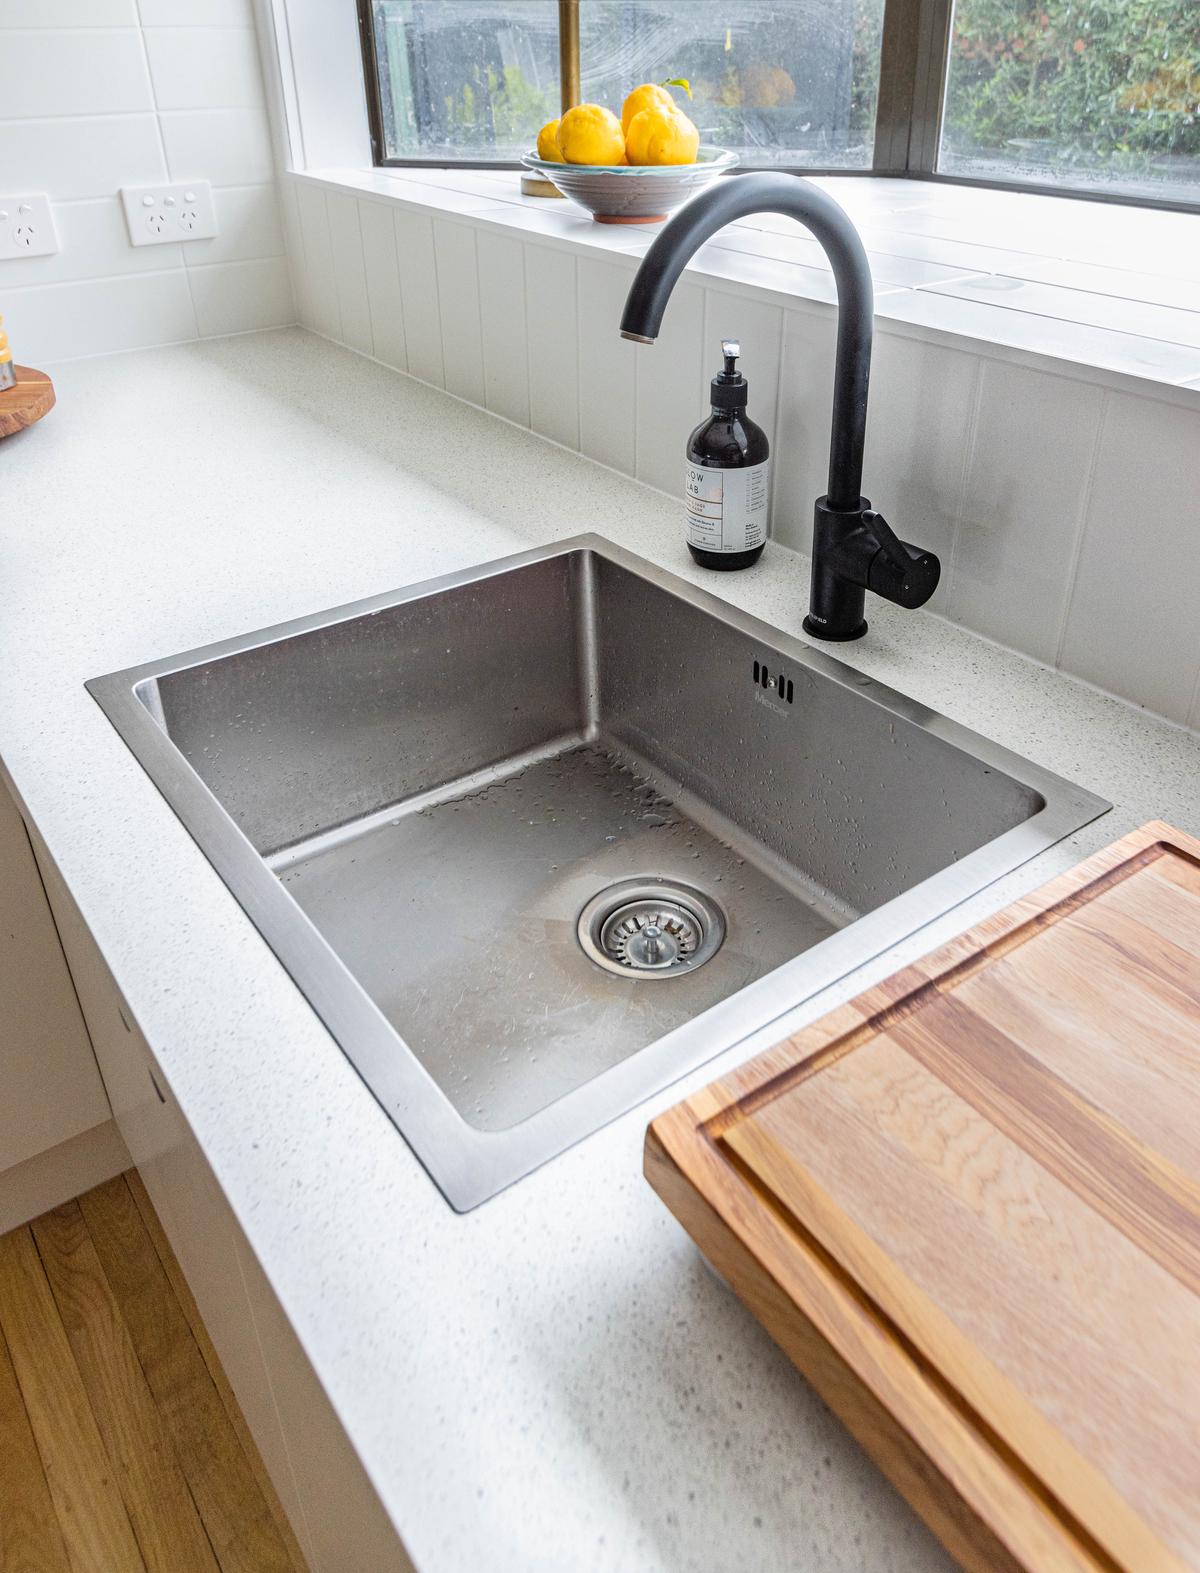 Illustration of a kitchen sink showing its different components